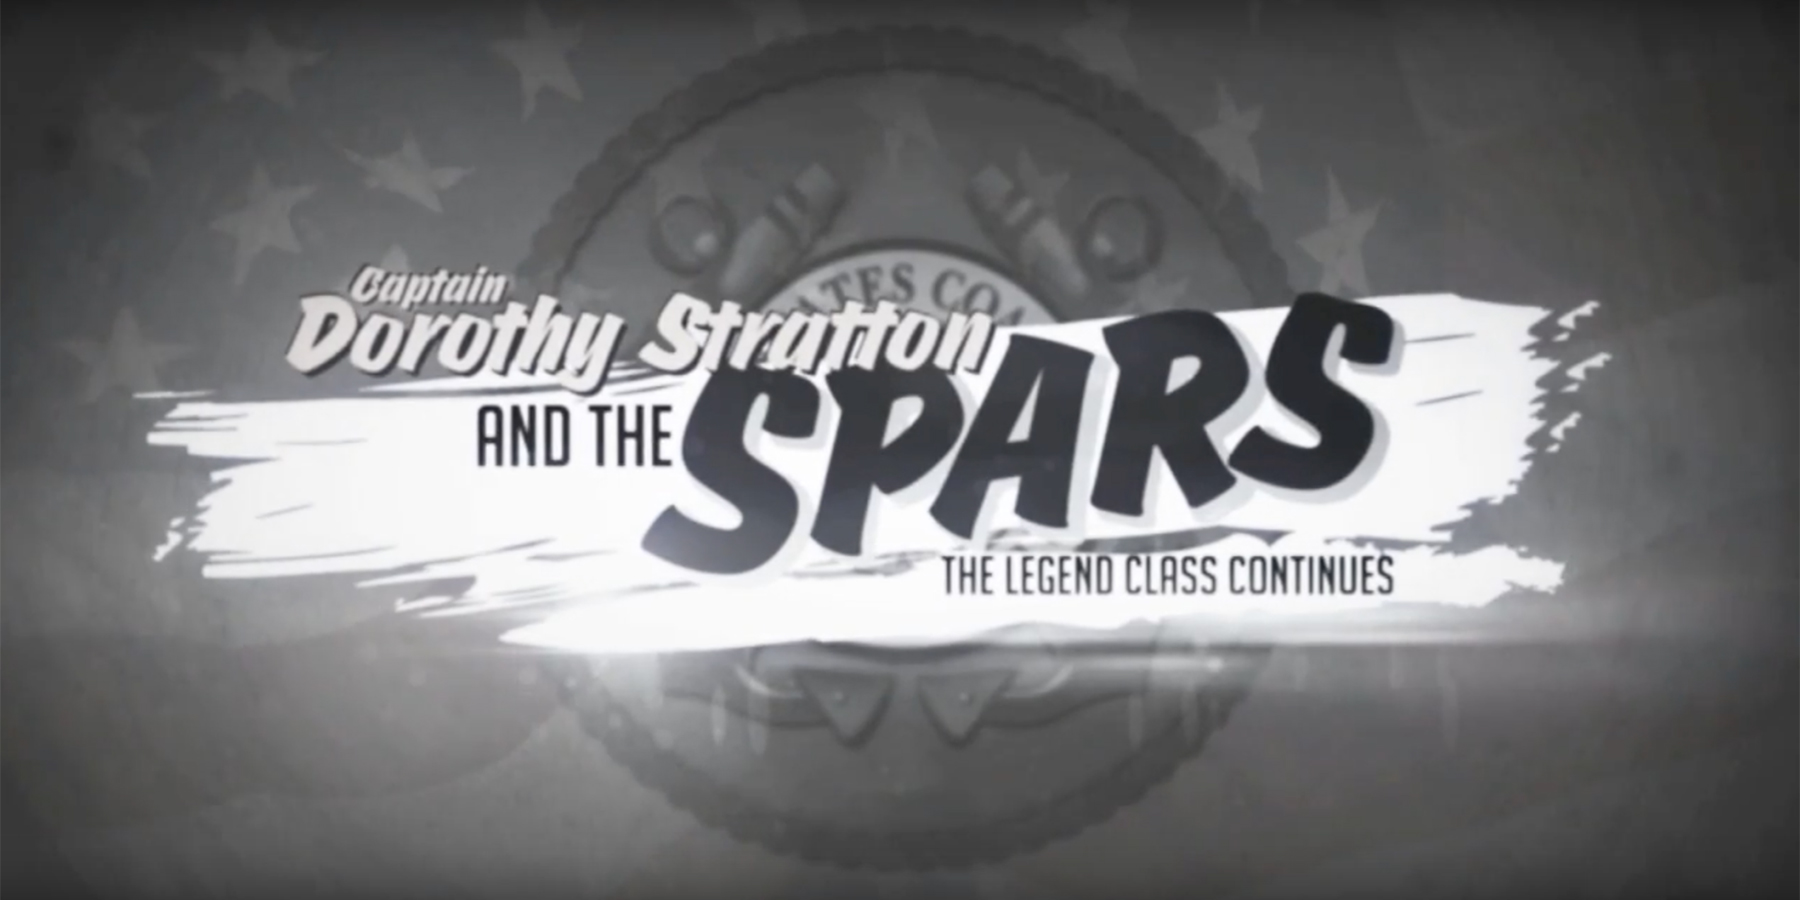 Captain Dororthy Stratton and the sparrs